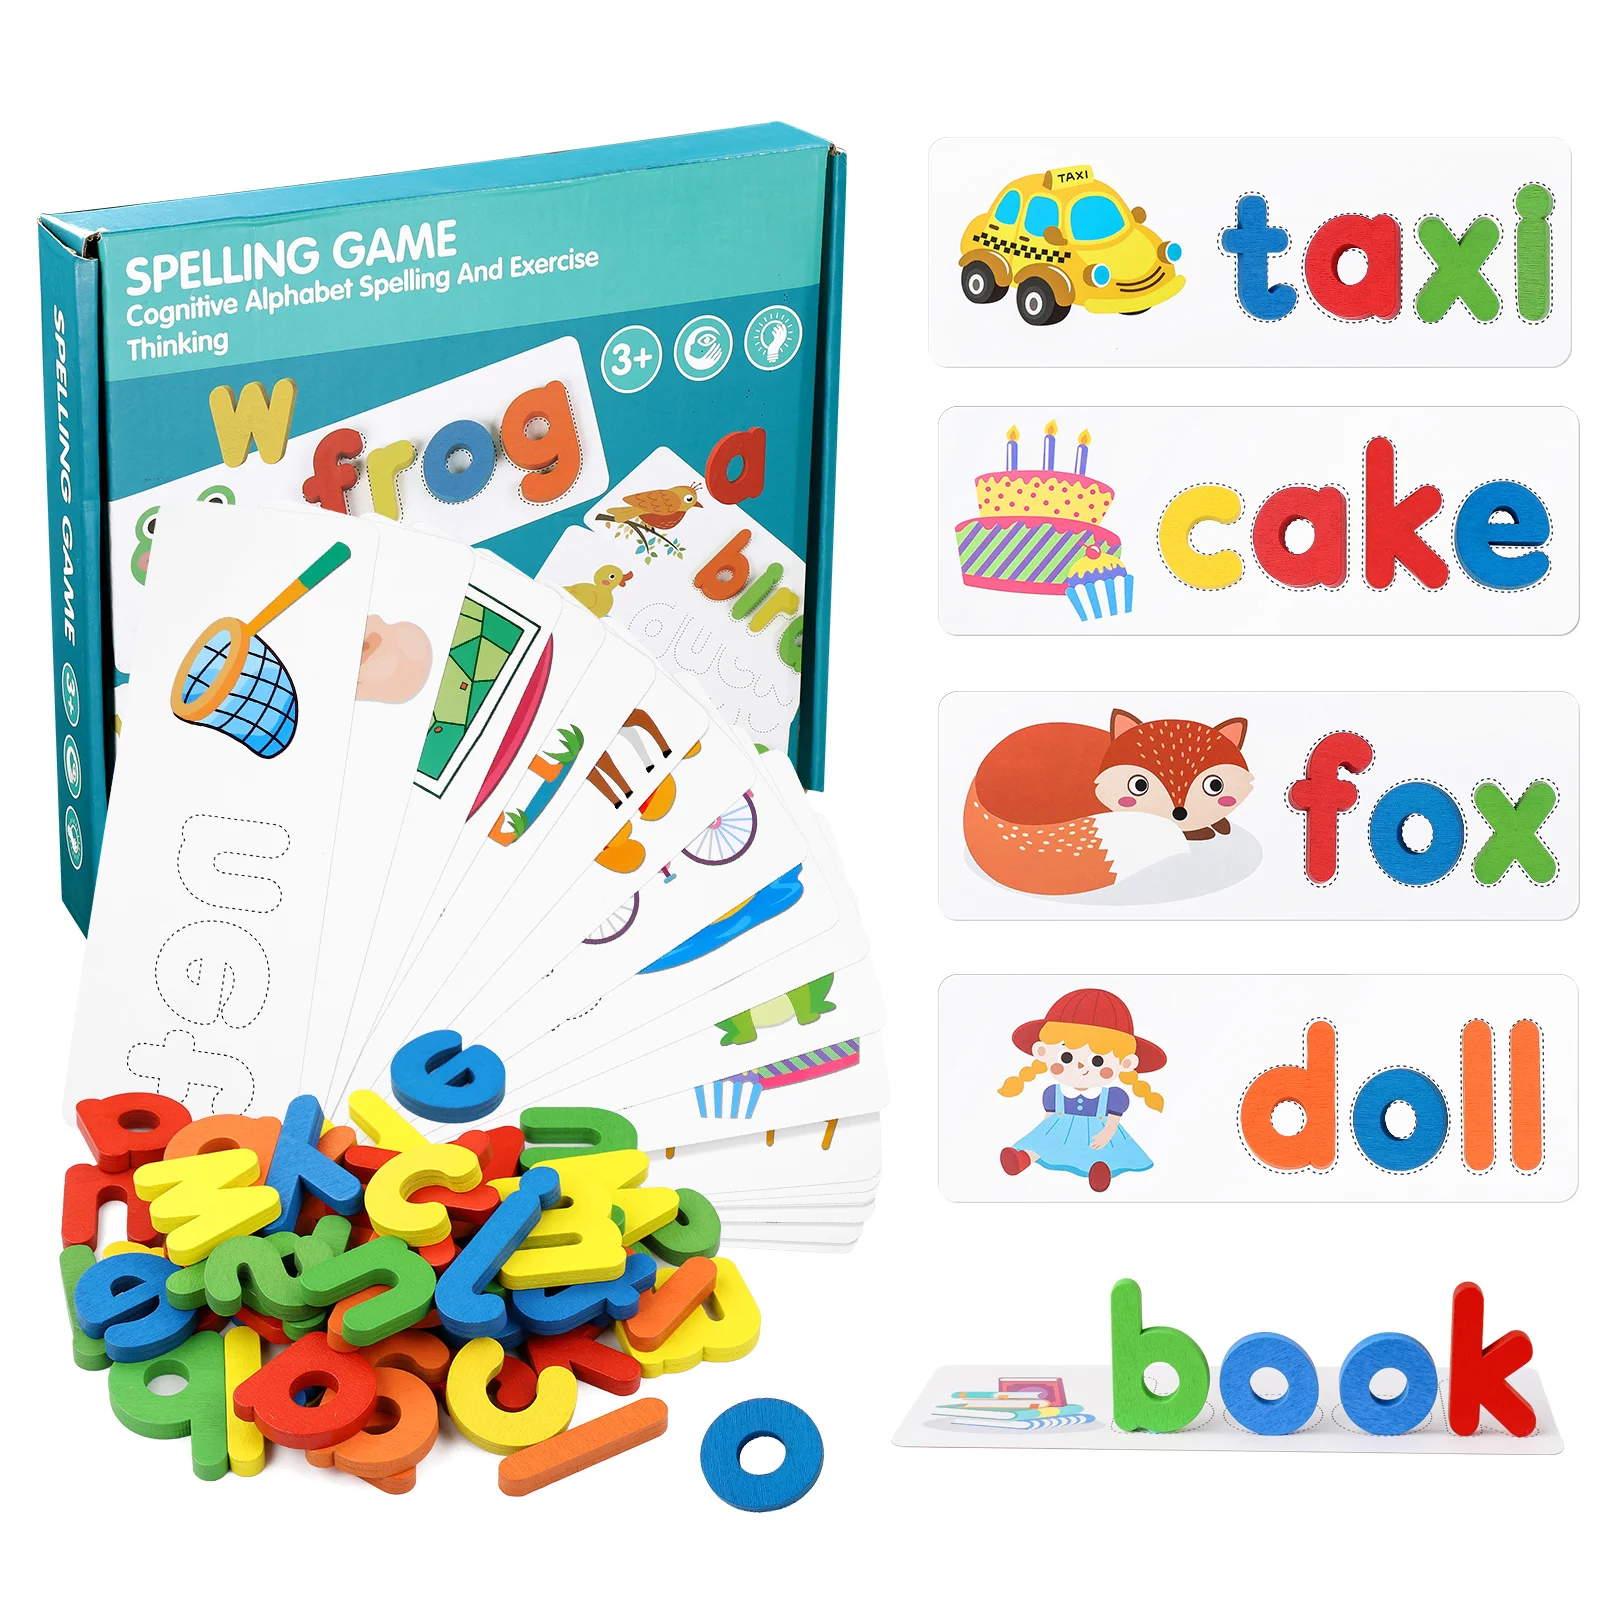 

NUOBESTY 1 Set Spelling Words Game 26 English Alphabet Early Learning Cognitive Tool Word Spelling Exercises Games Pedagogical